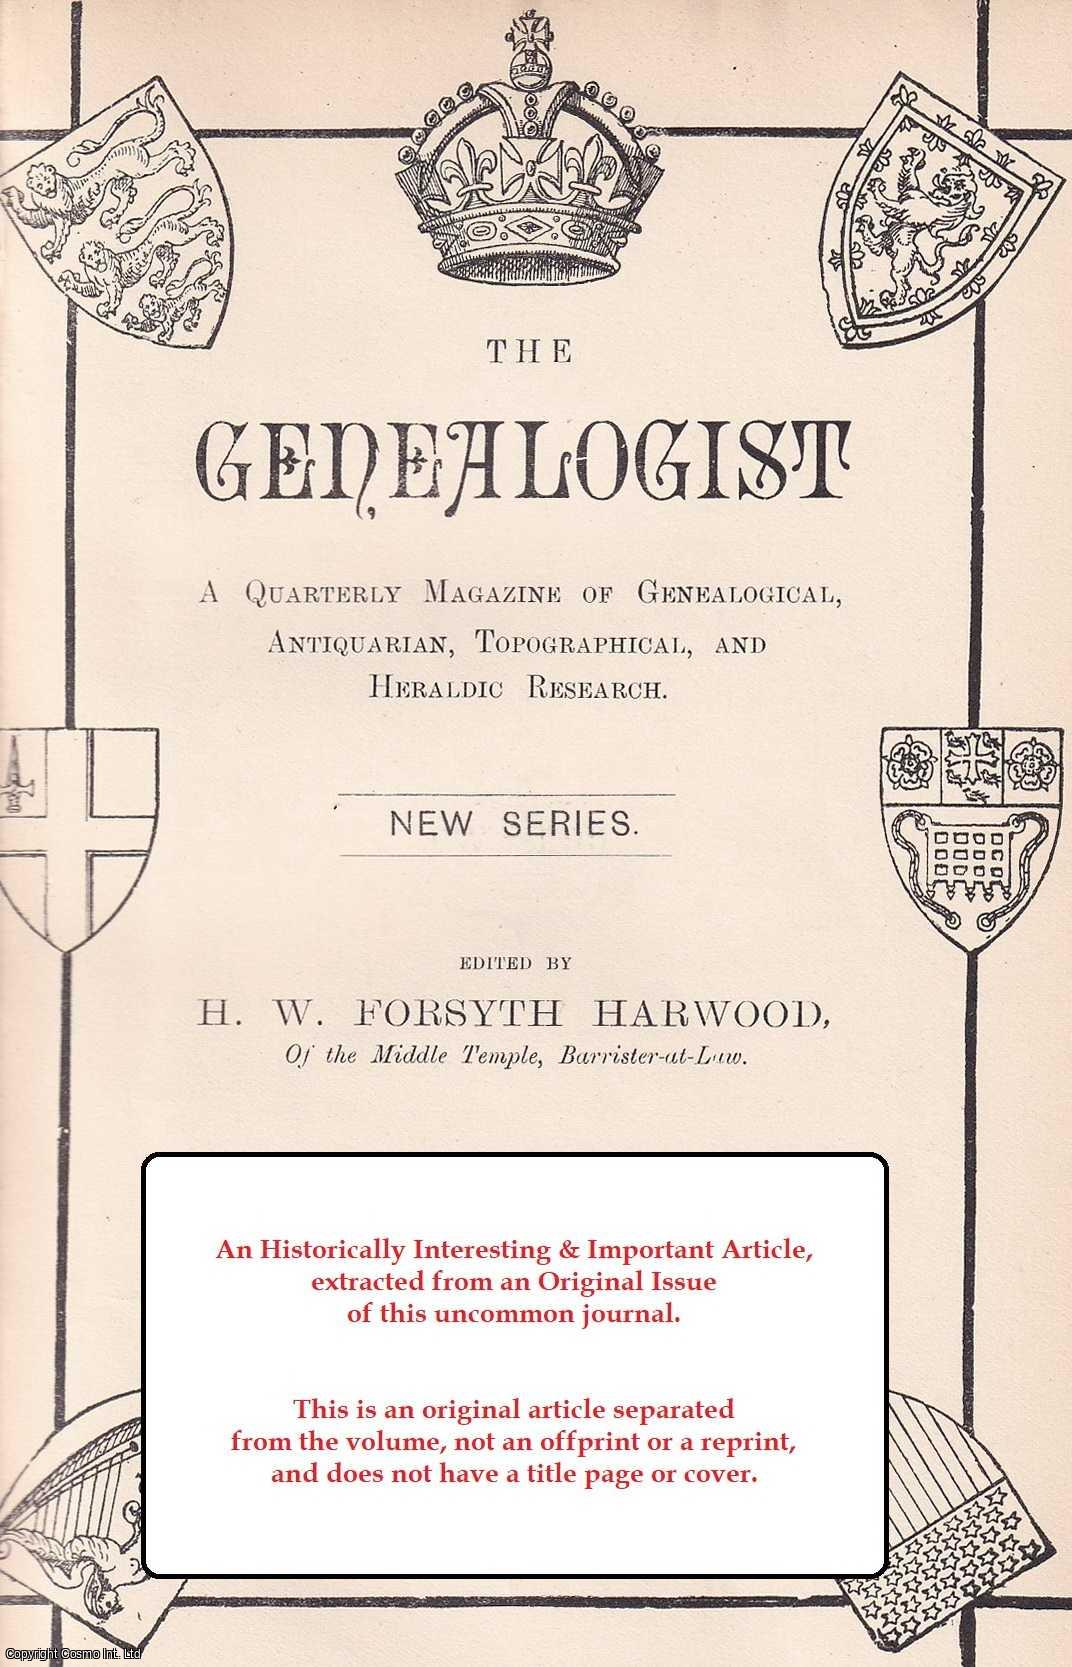 Henry Barkly - Testa de Nevill - Part II, Conclusion. An original article from The Genealogist, 1888.